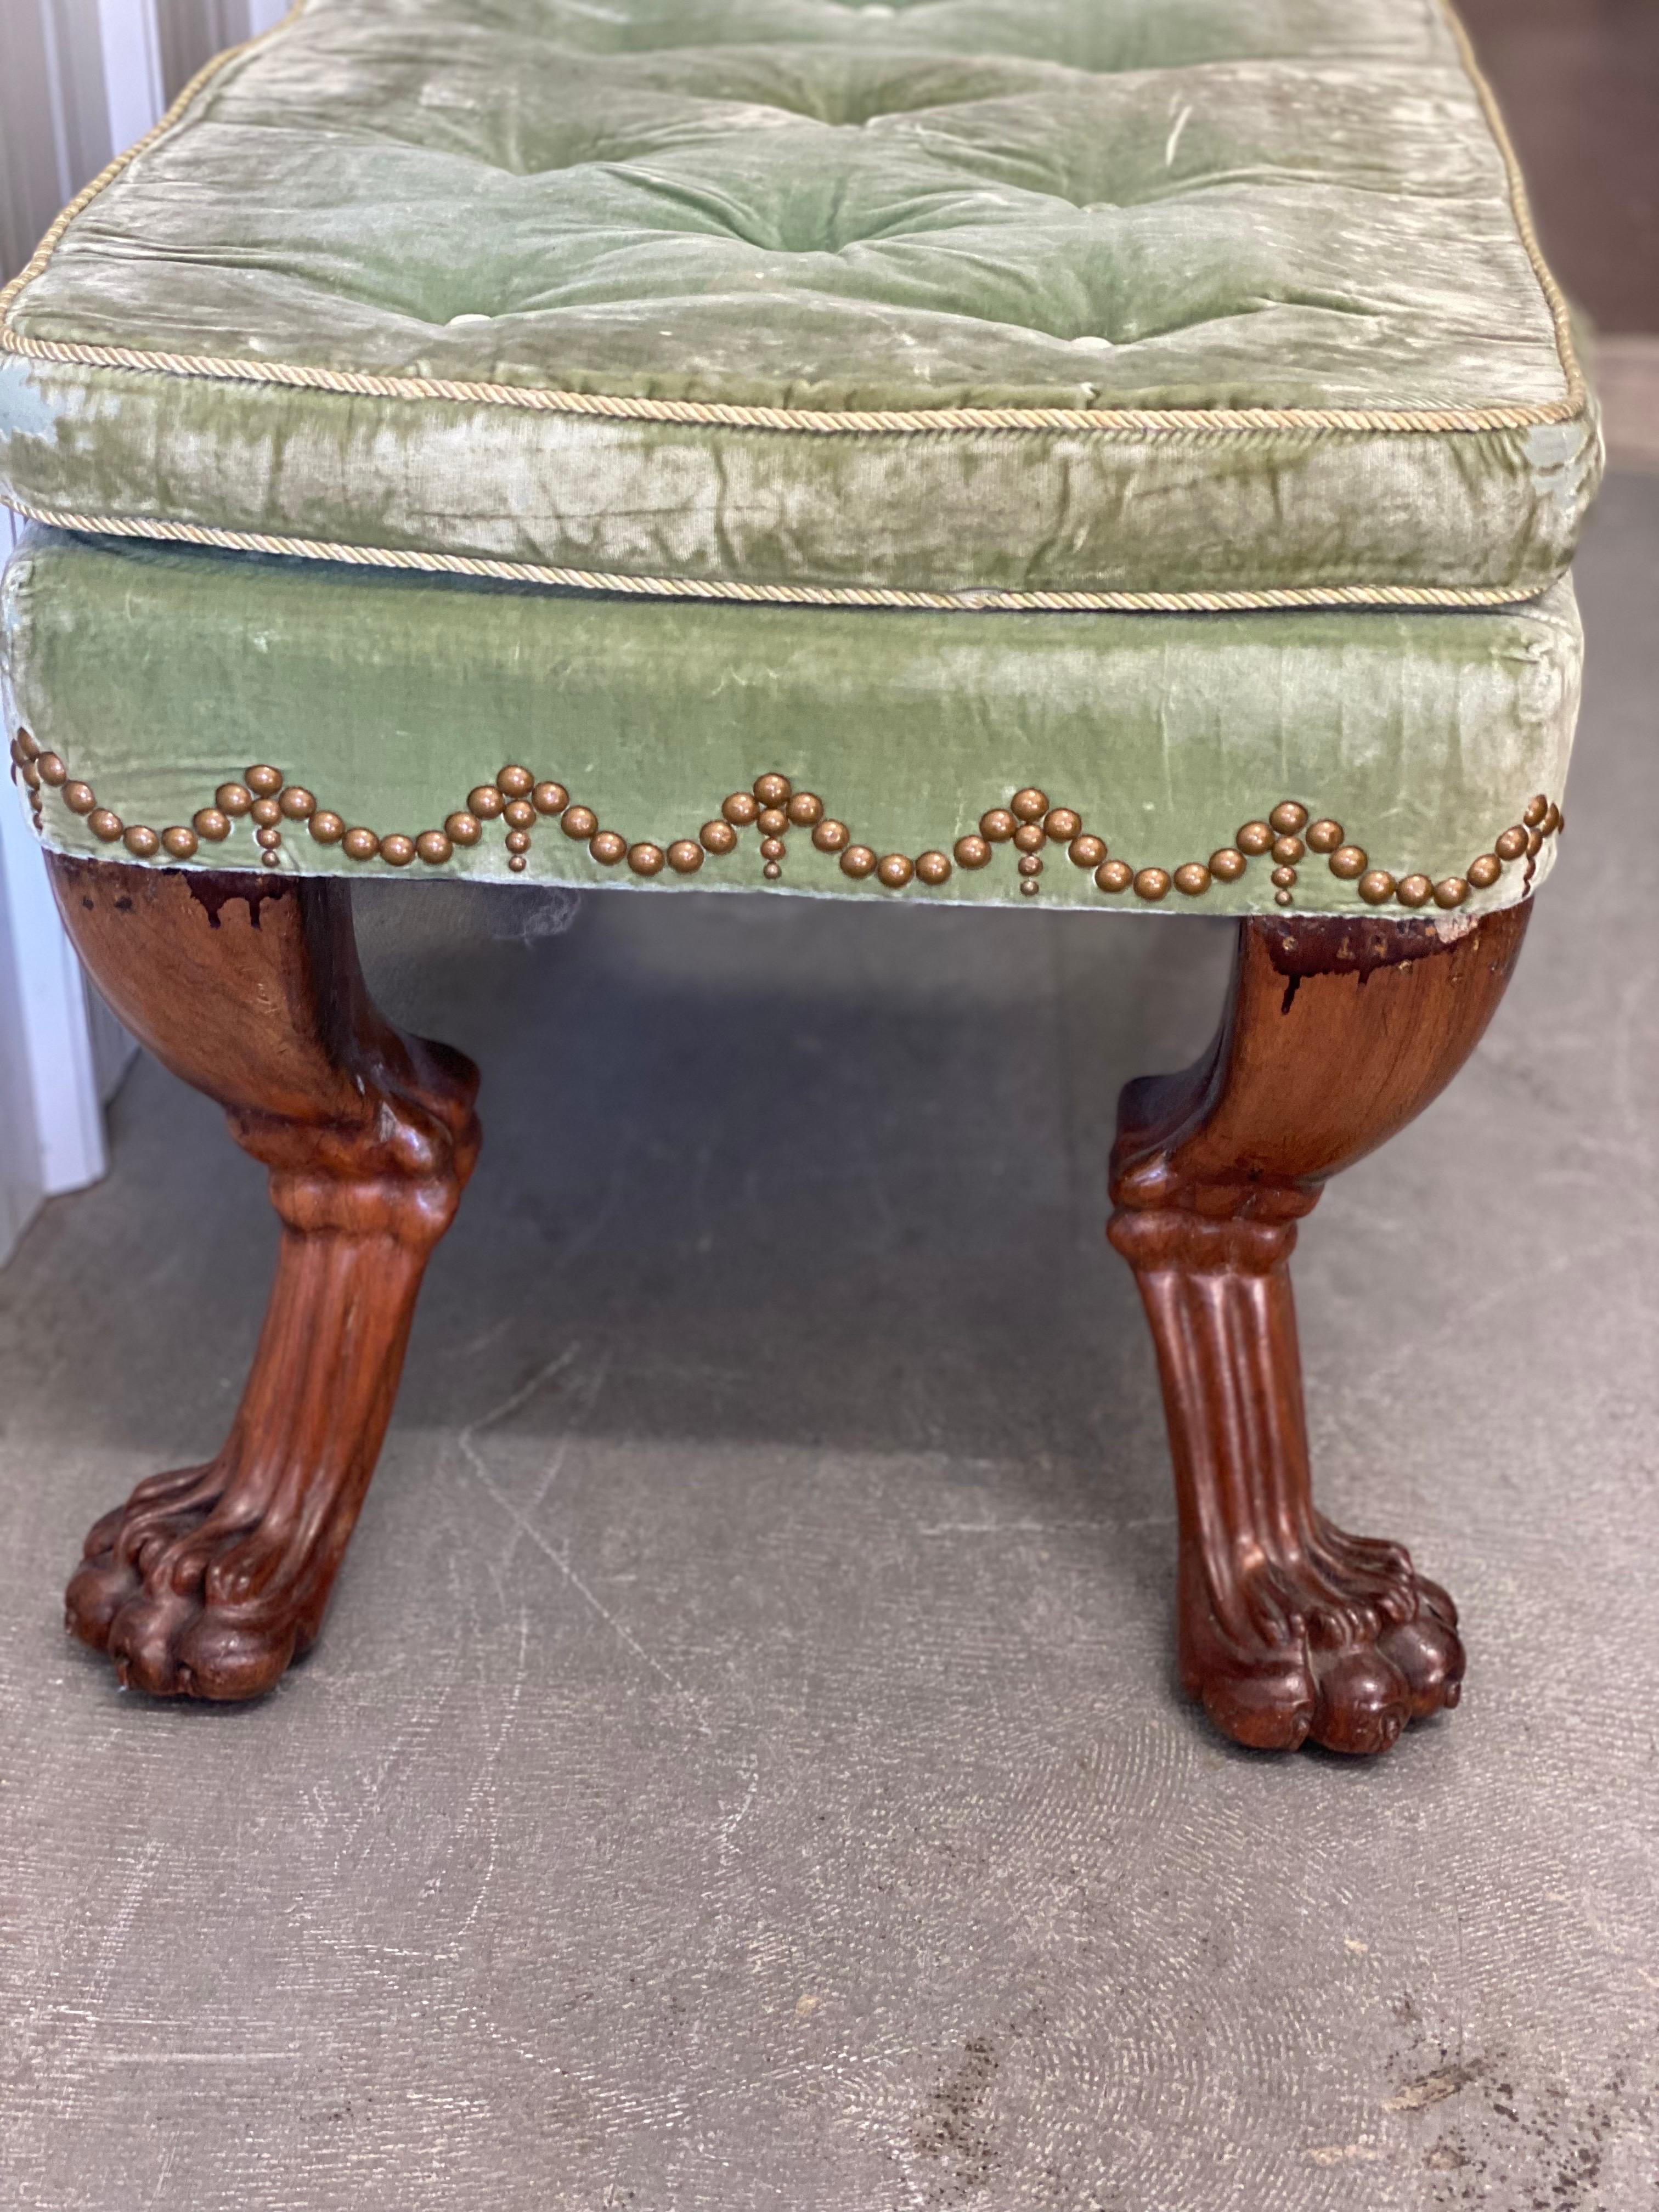 18th Century English Mahogany Clawfoot Stool in Velvet with Nailheads For Sale 10